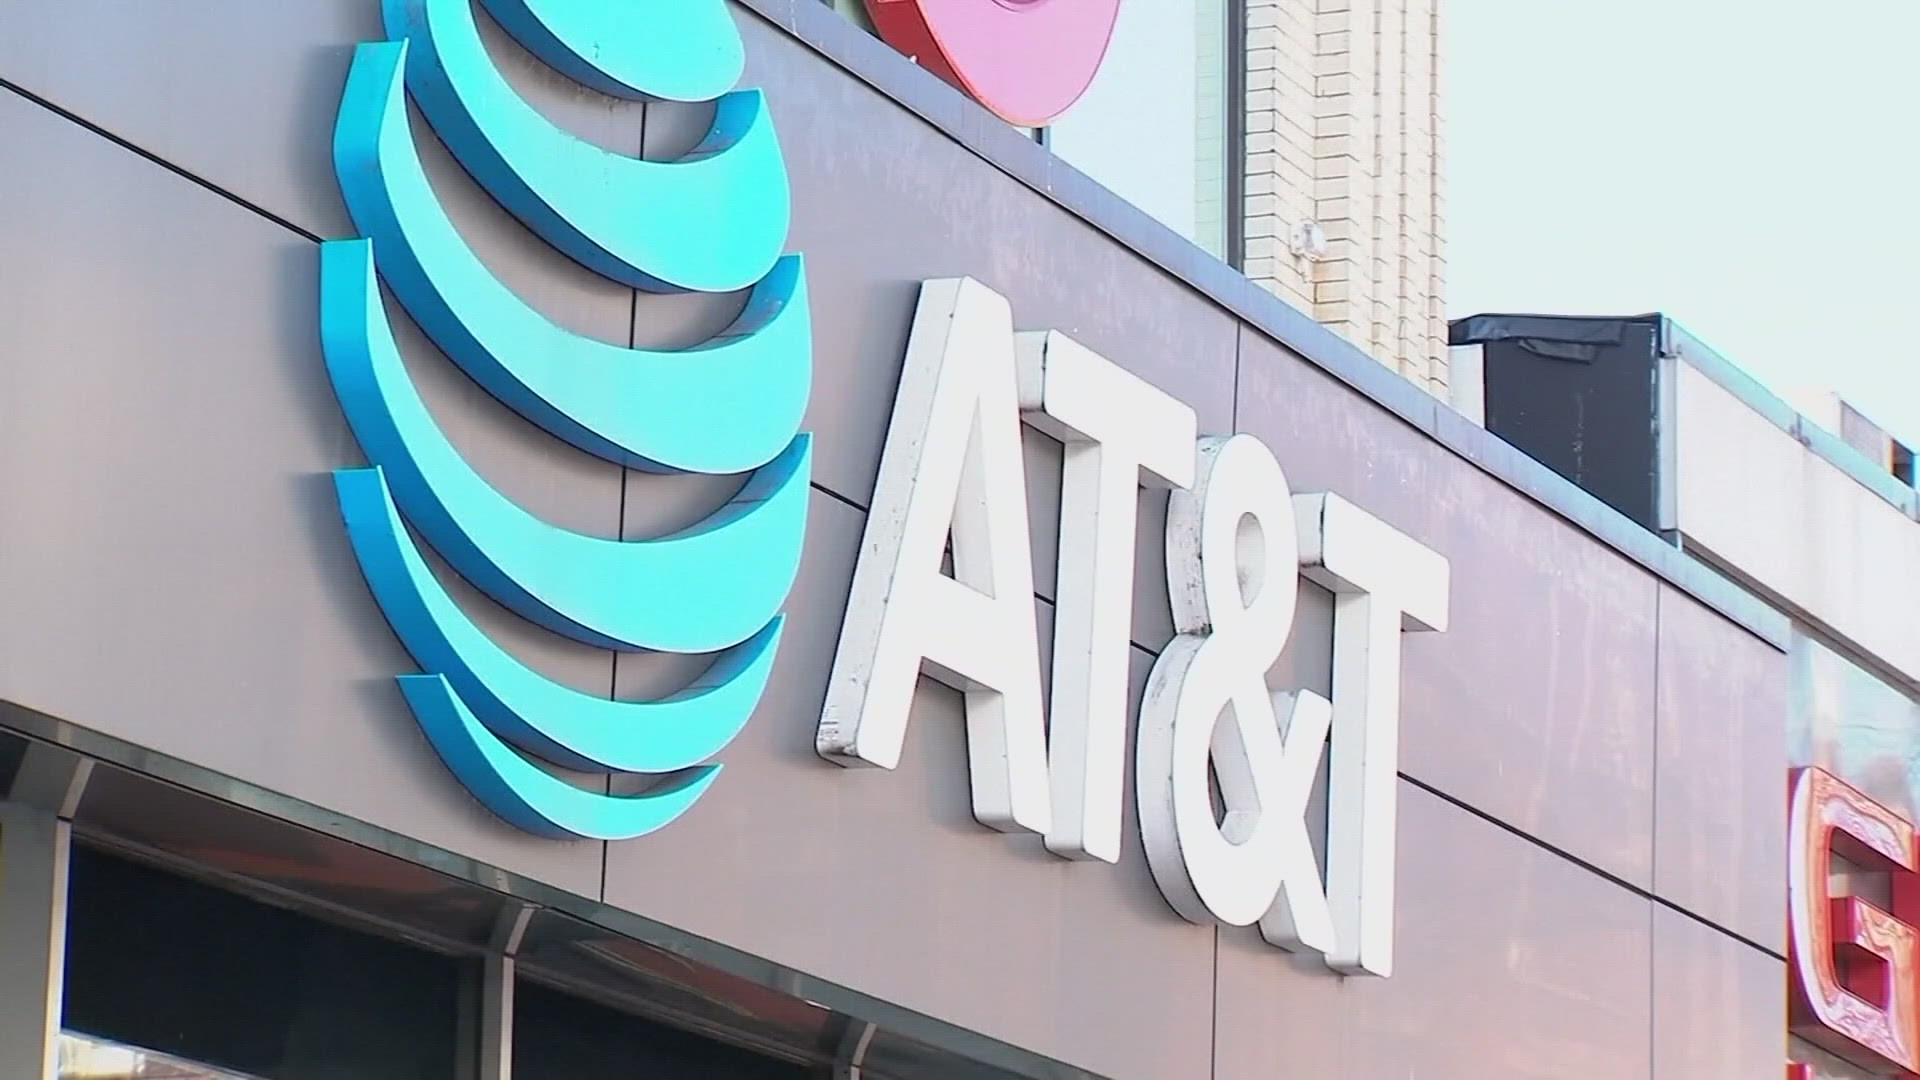 Service provider AT&T is experiencing a massive service outage. Issues started in the St. Louis area a little after 3 a.m. Thursday.